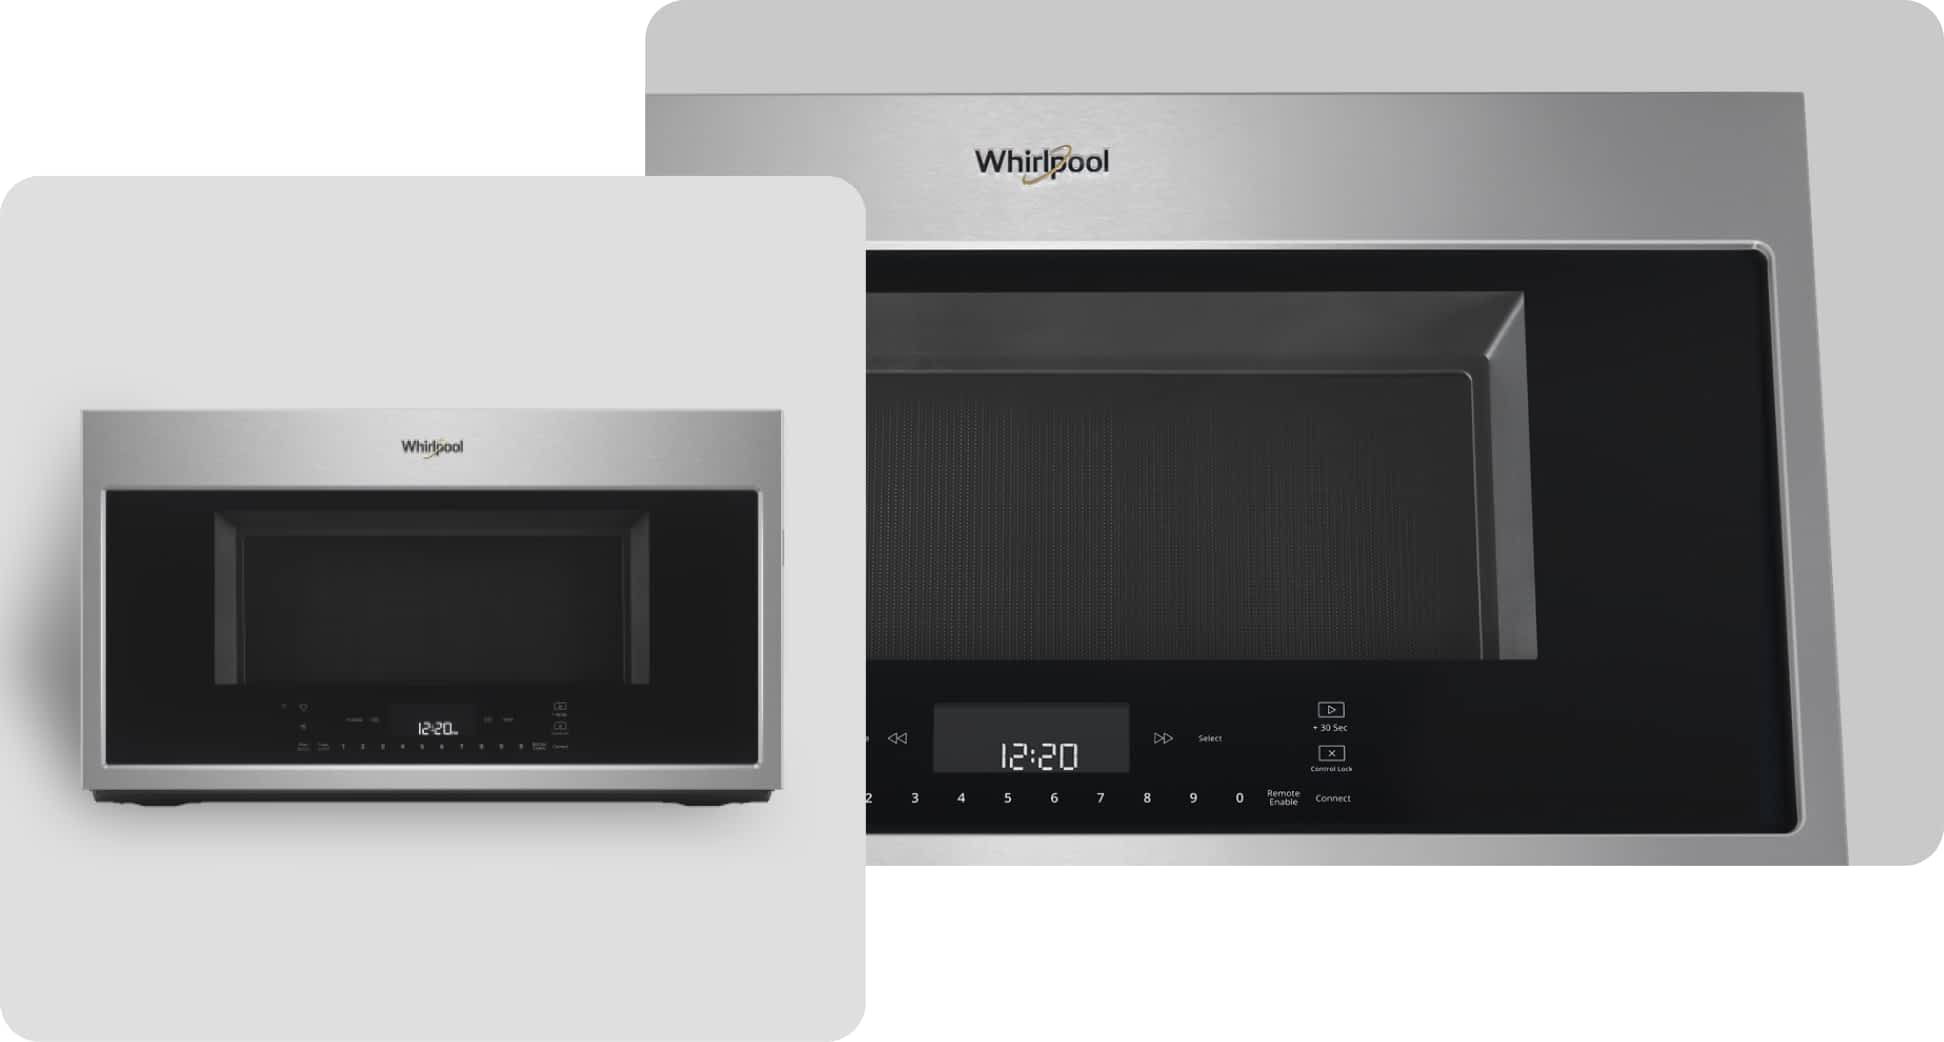 A Whirlpool® Microwave with a Fingerprint-Resistant Stainless Finish